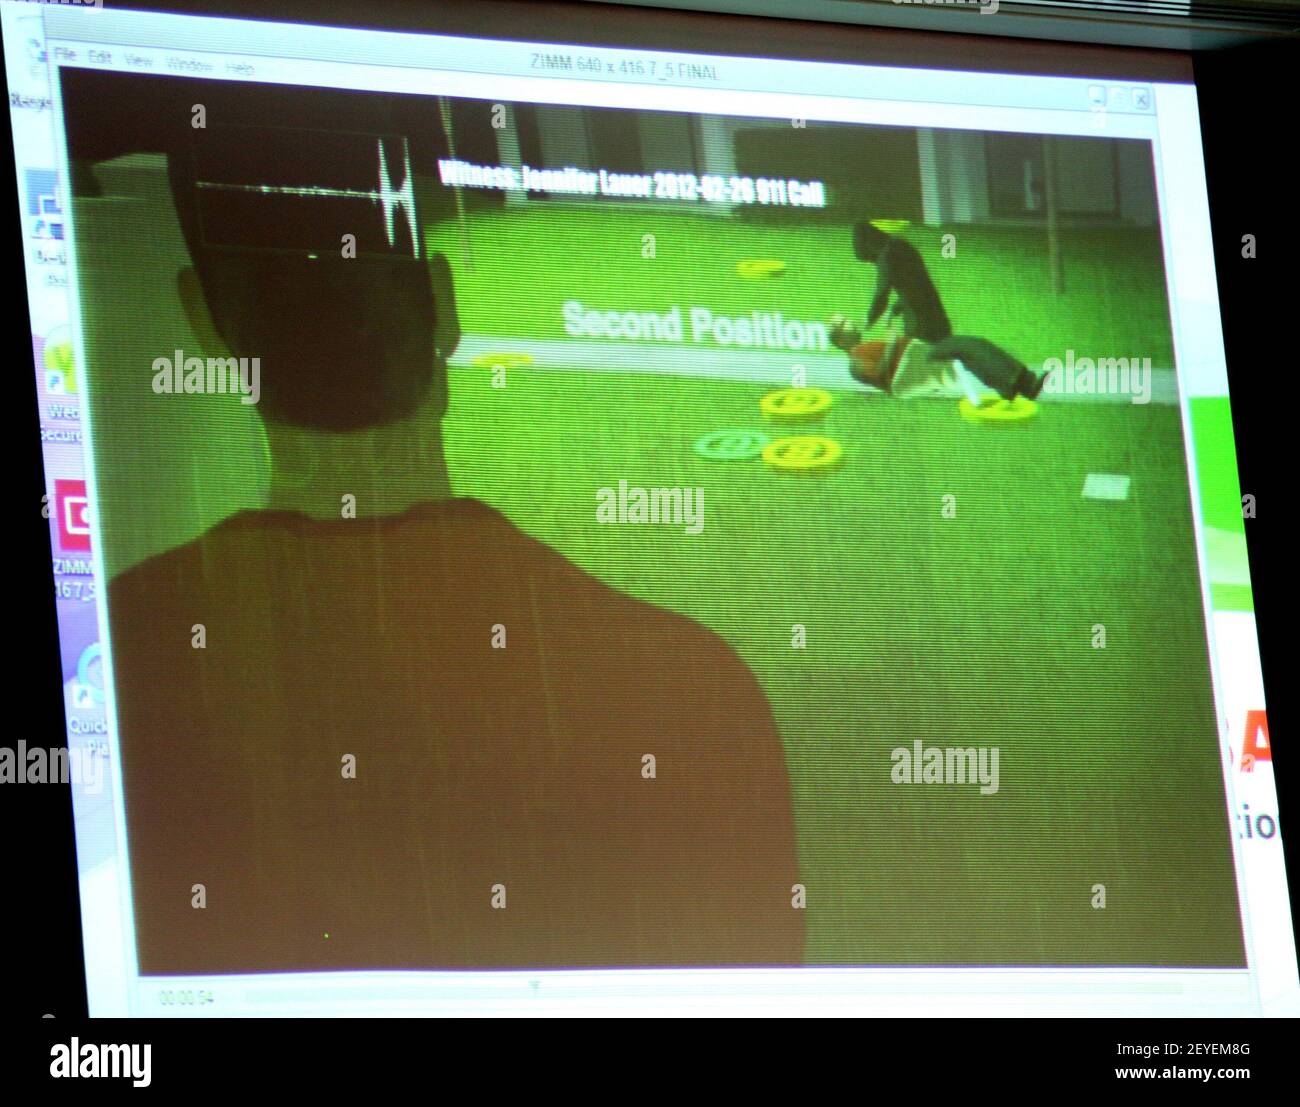 Animation provided by George Zimmerman's defense team is displayed during closing arguments in Zimmerman's trial in Seminole circuit court in Sanford, Florida, Friday, July 12, 2013. Zimmerman has been charged with second-degree murder for the 2012 shooting death of Trayvon Martin. (Photo by Pool photo by Joe Burbank/Orlando Sentinel/MCT/Sipa USA) Stock Photo